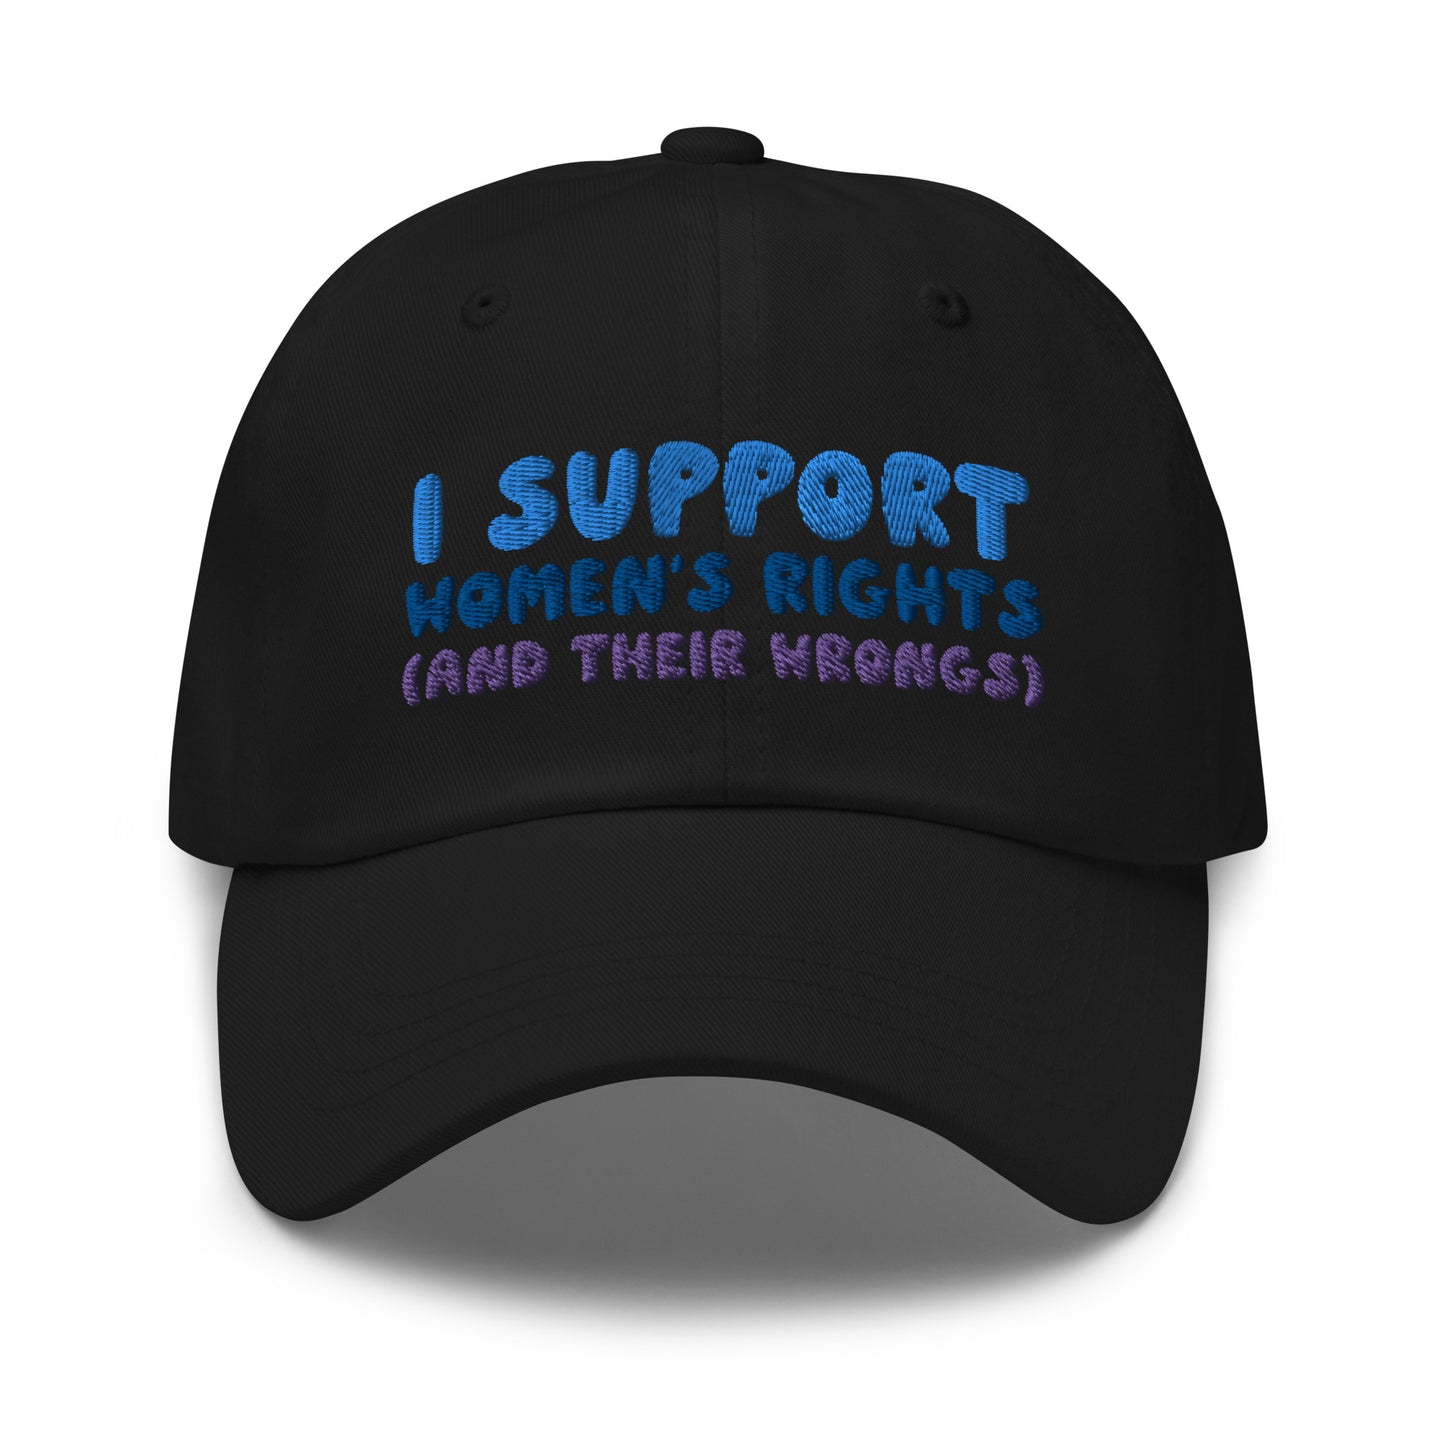 I Support Women's Rights (and Wrongs) hat V2